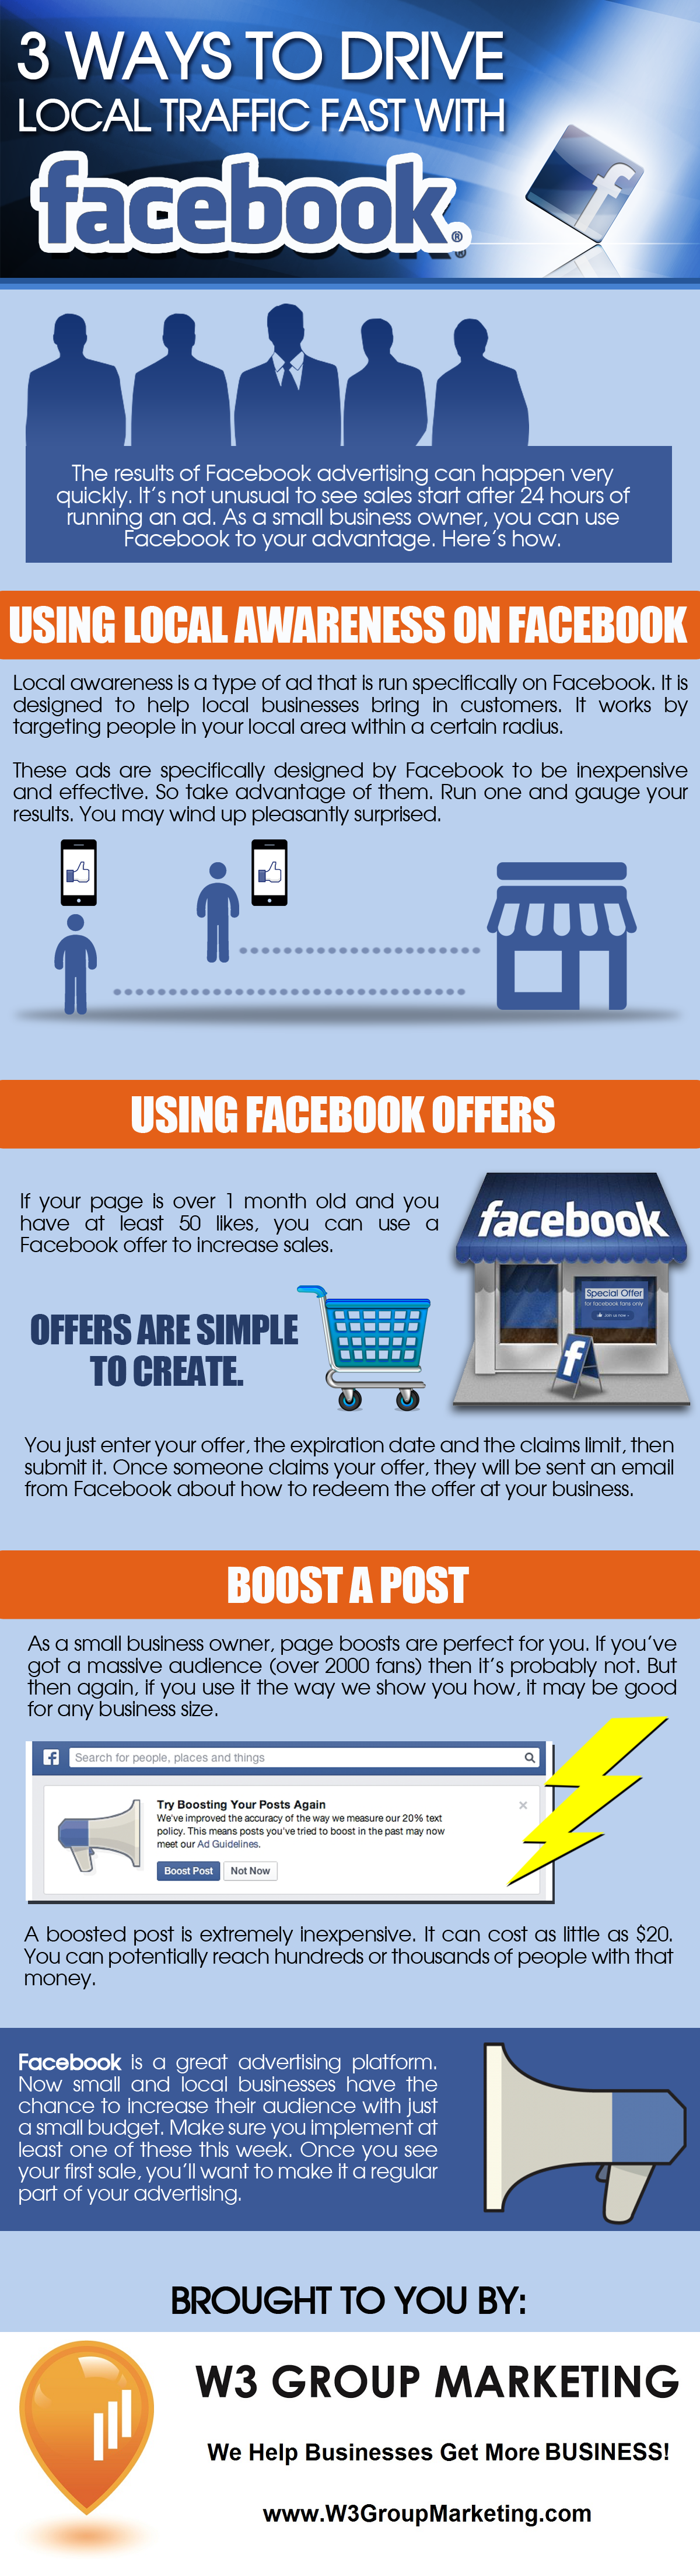 [Infographic] Three Ways to Drive Local Traffic Fast with Facebook Advertising